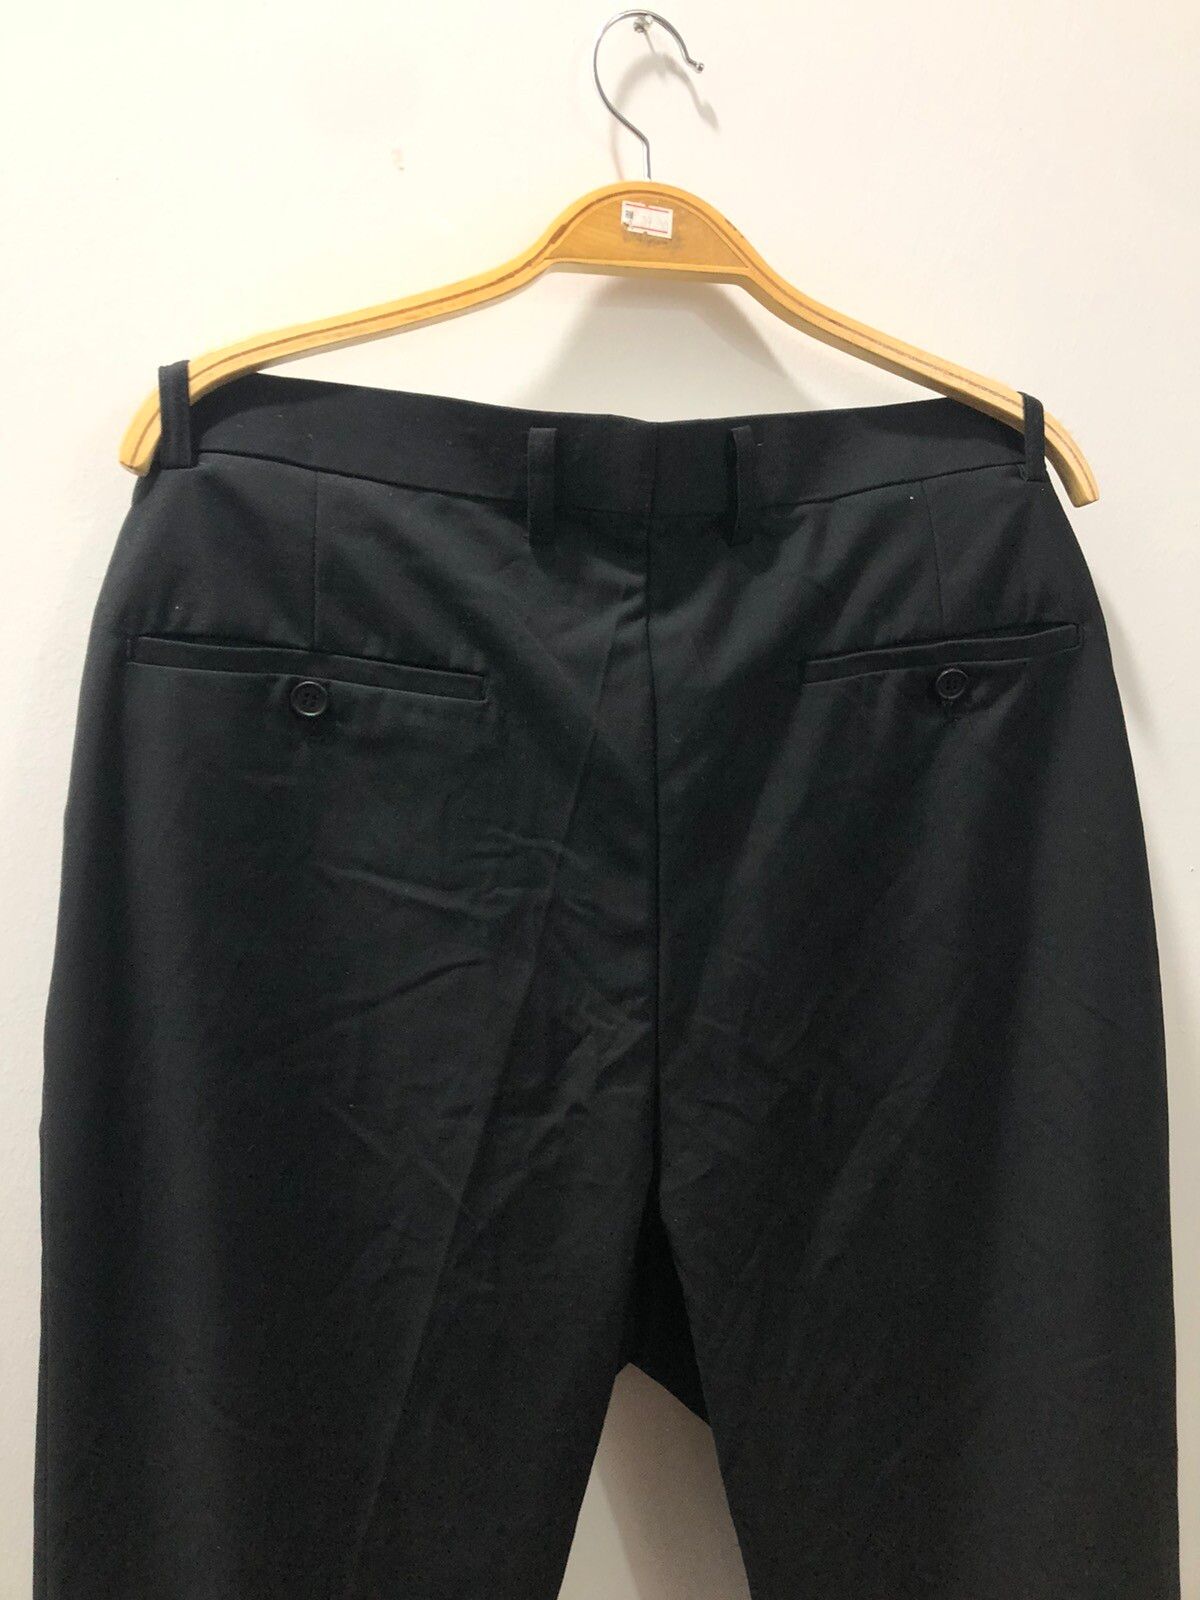 SS14 Acne Studios Casual Office Pant - 10